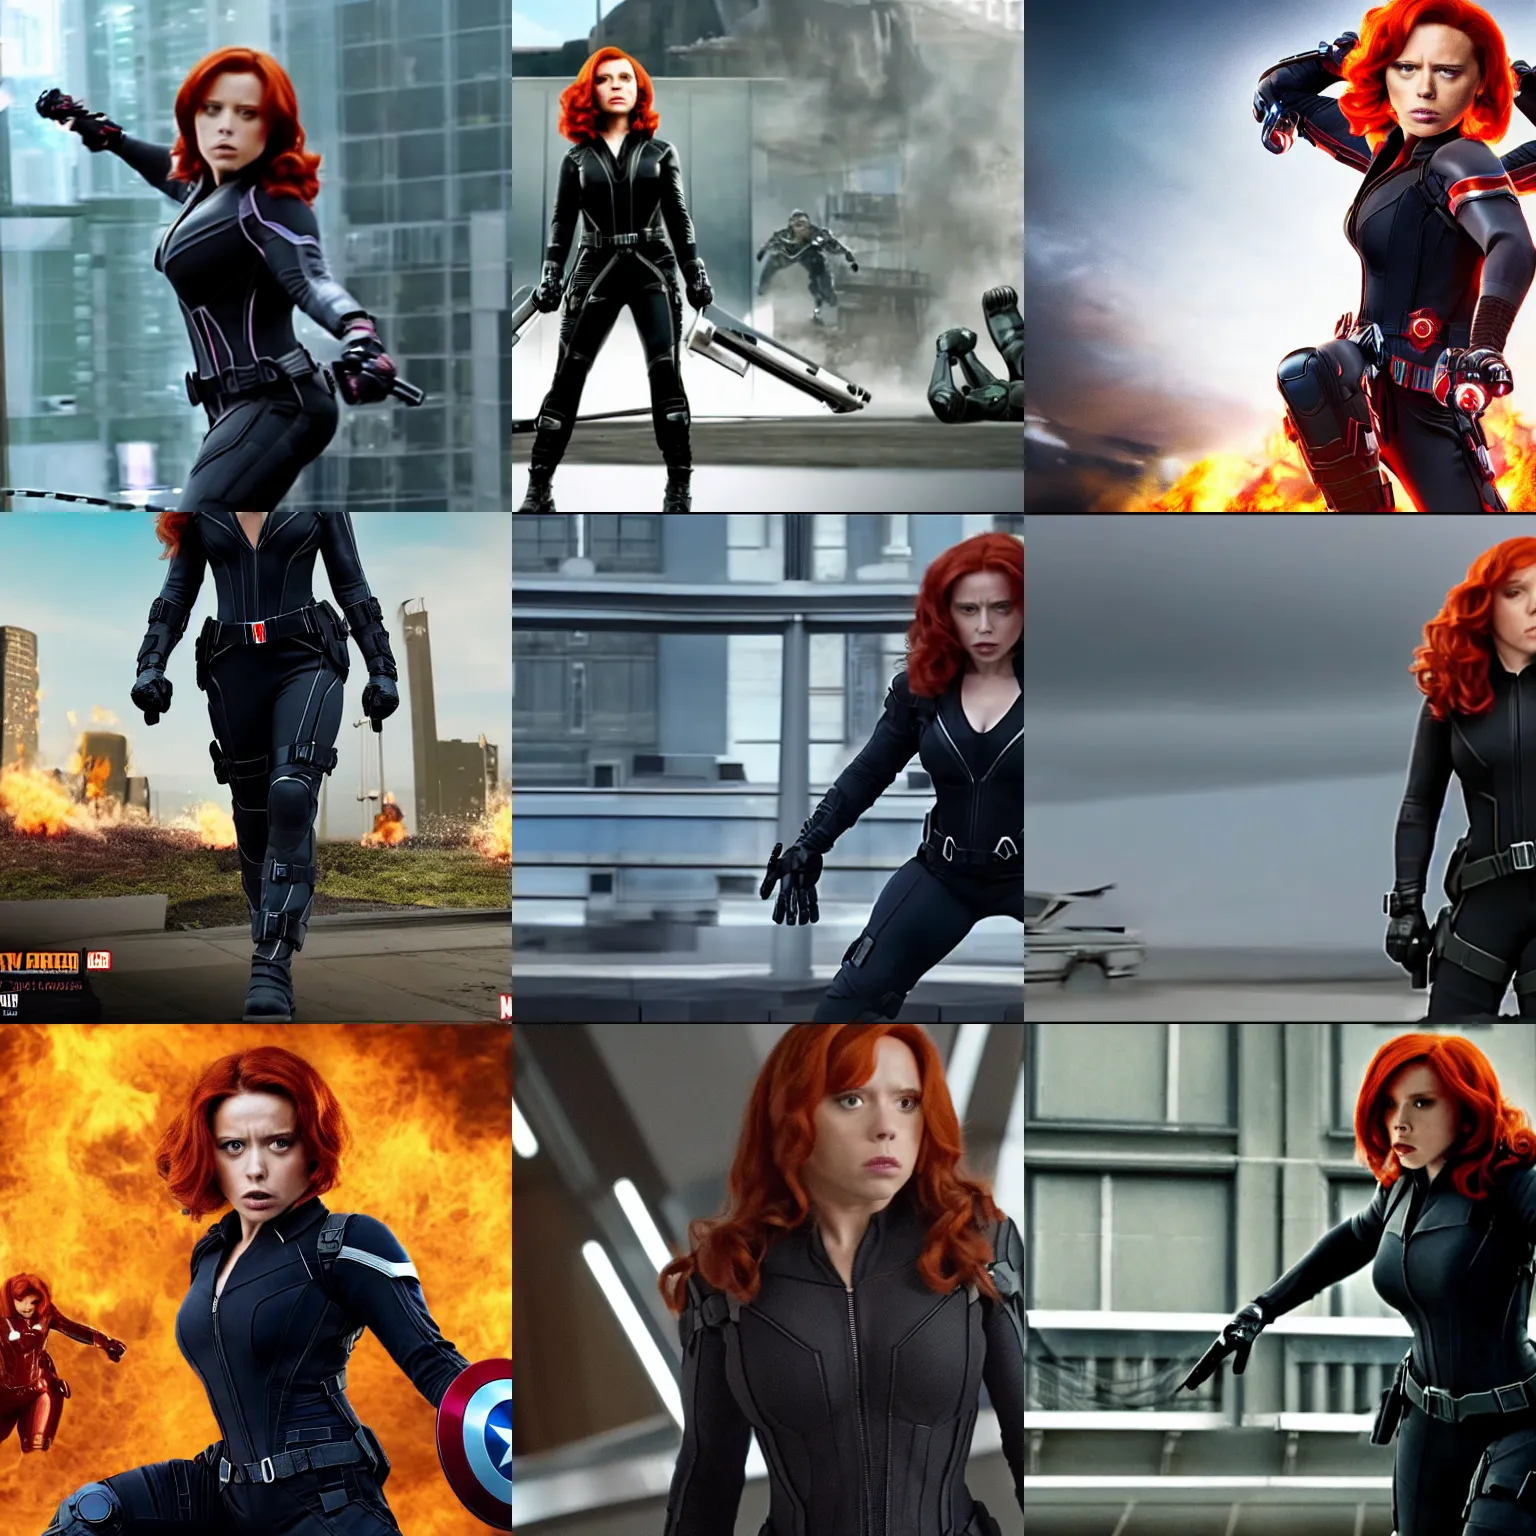 Black Widow Hysterectomy Line Age of Ultron Reference